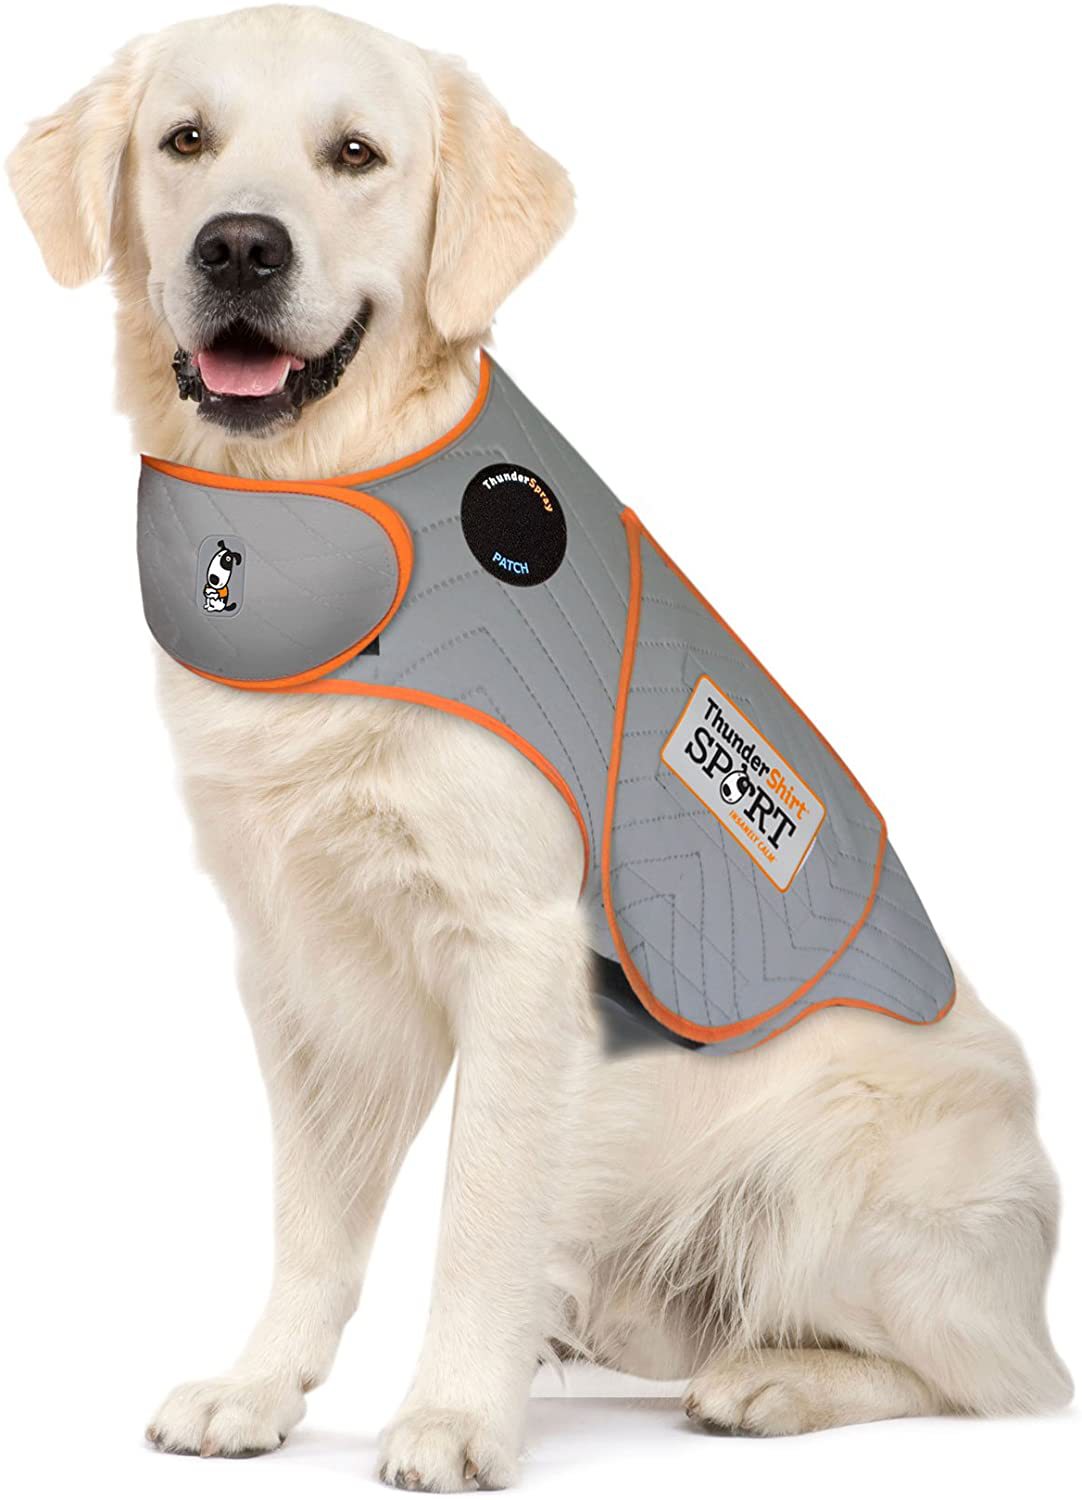 Anxiety Jacket For Pet Dog Comforting Clothes